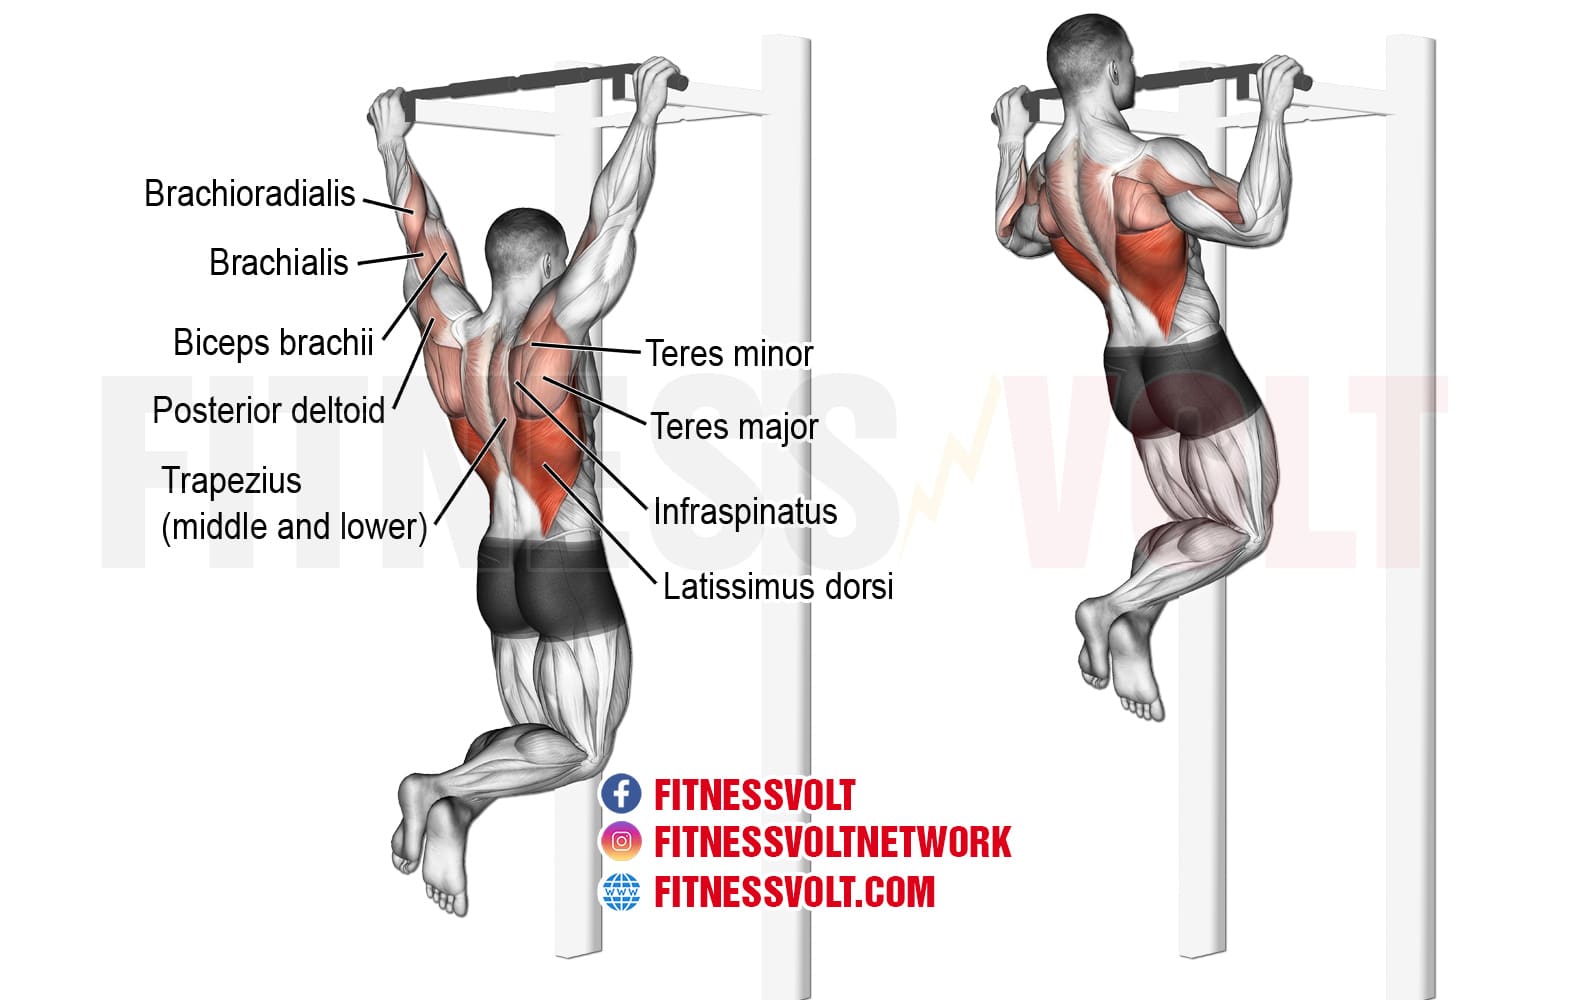 Pull-Up Exercise Guide: How To, Benefits, Muscles Worked, and Variations